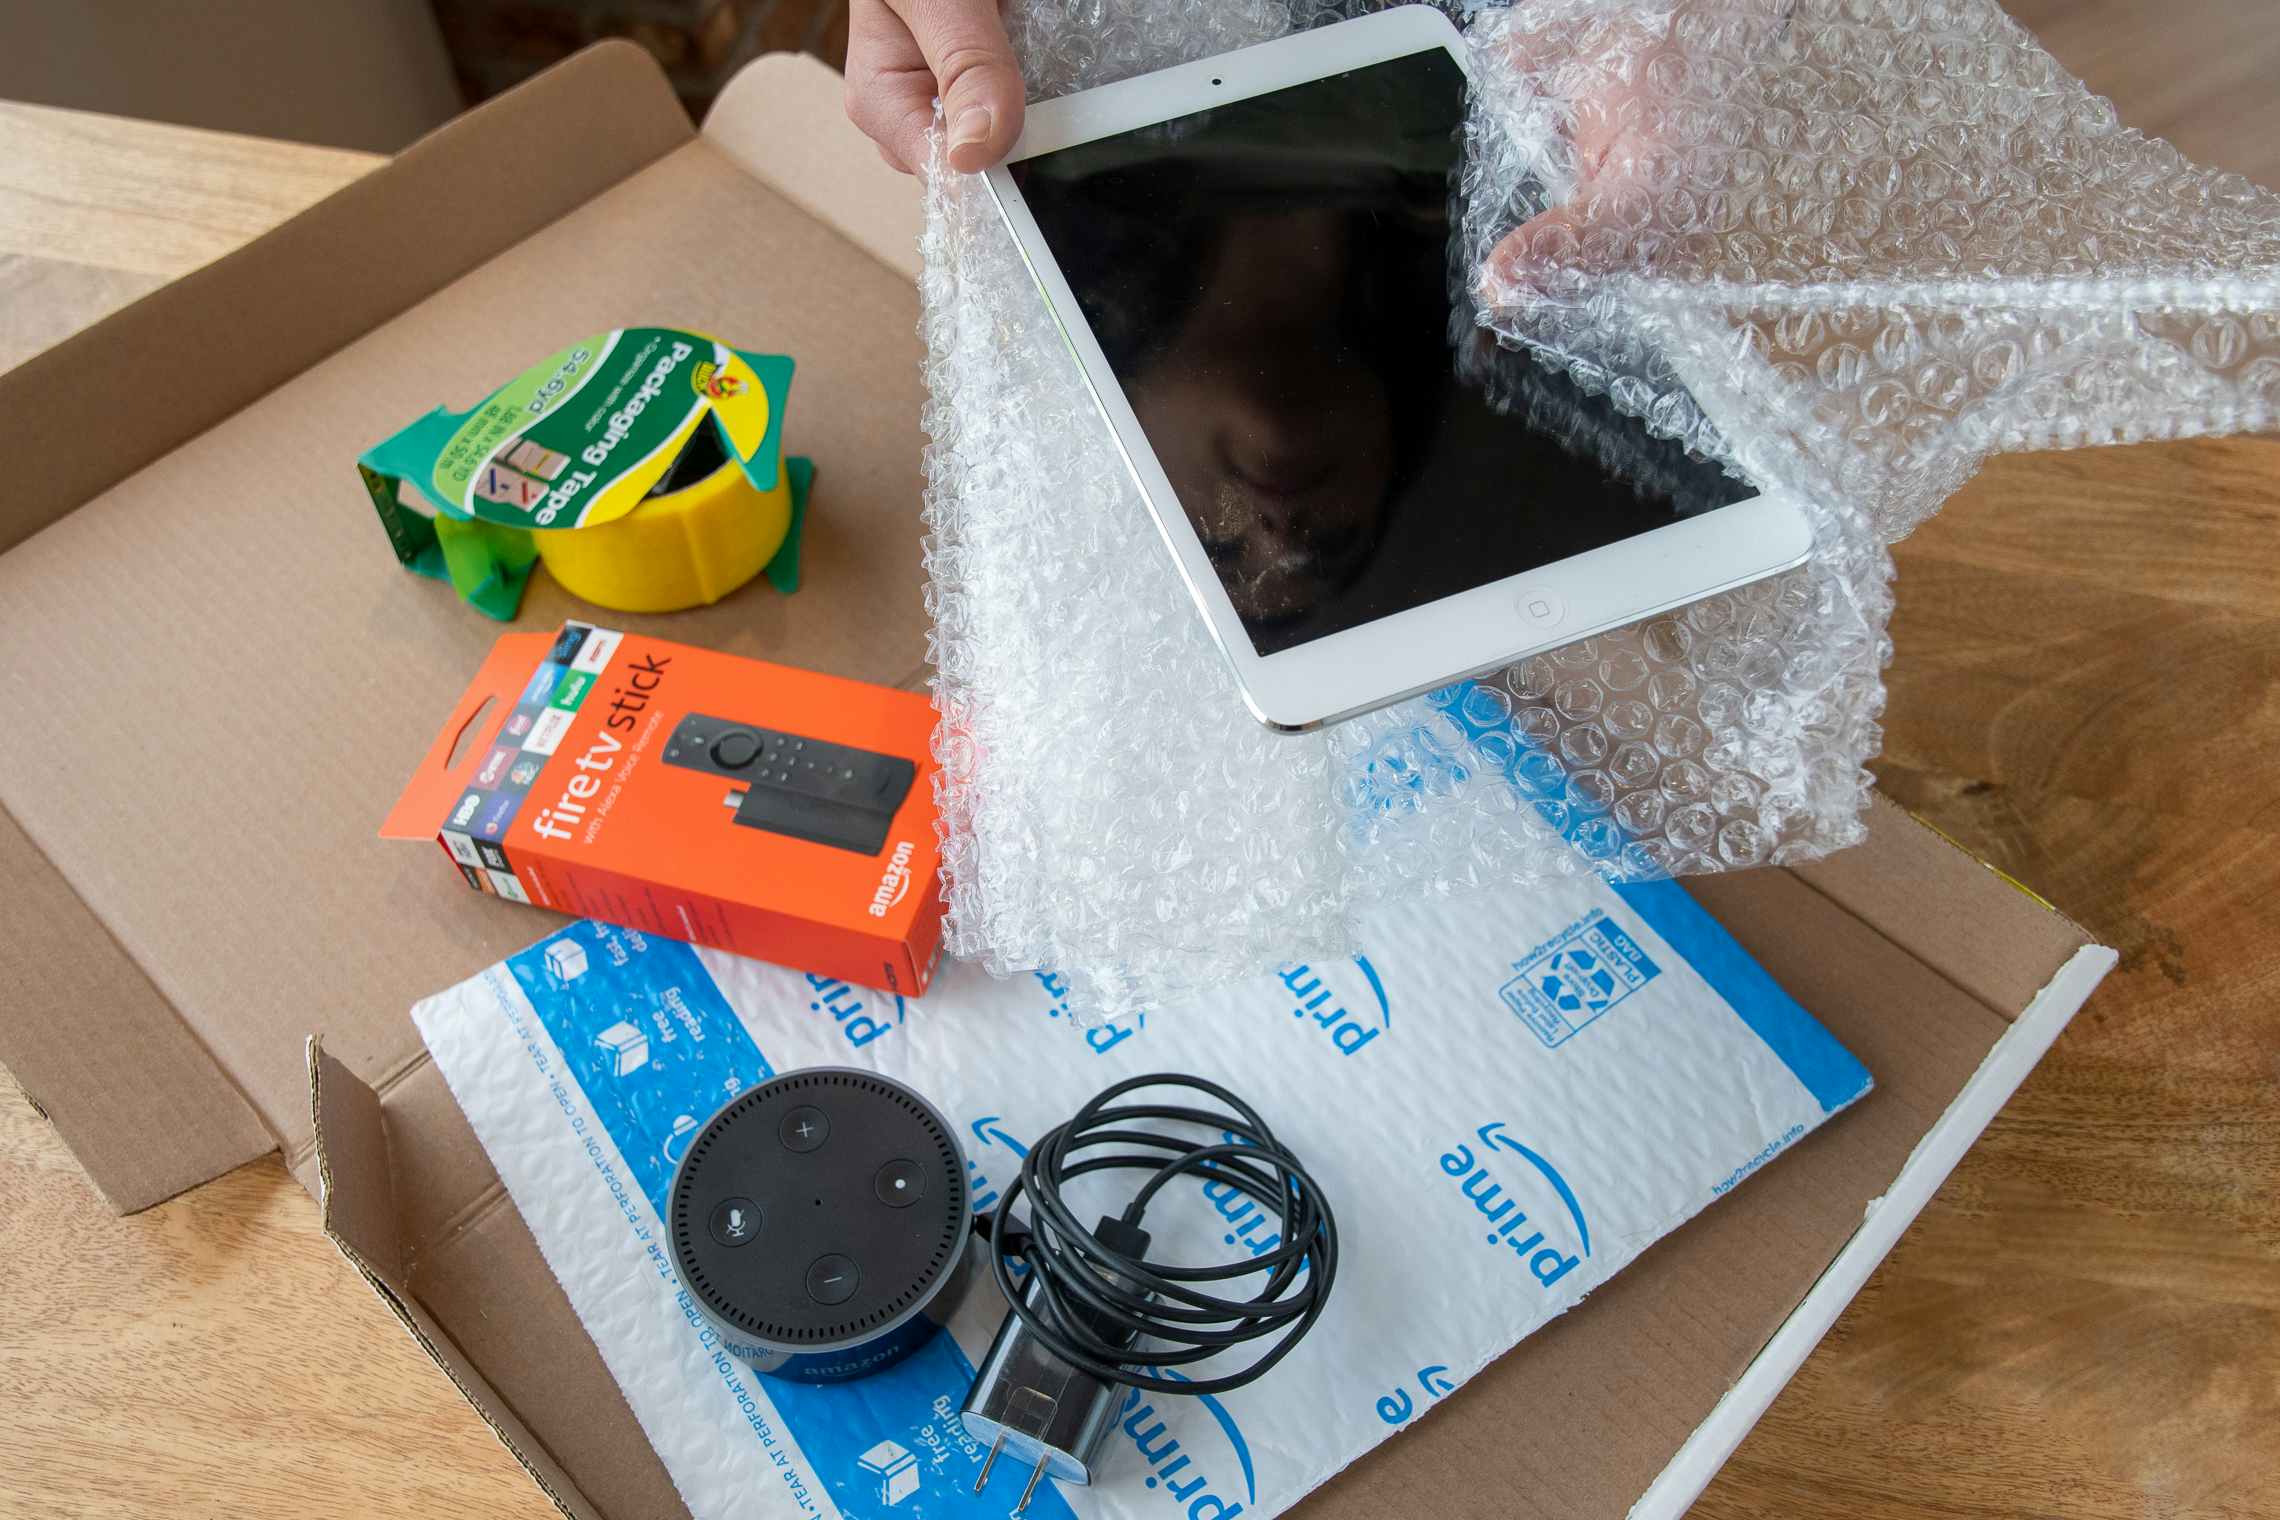 An iPad, Amazon Fire stick, and Amazon Echo dot being boxed up to ship.